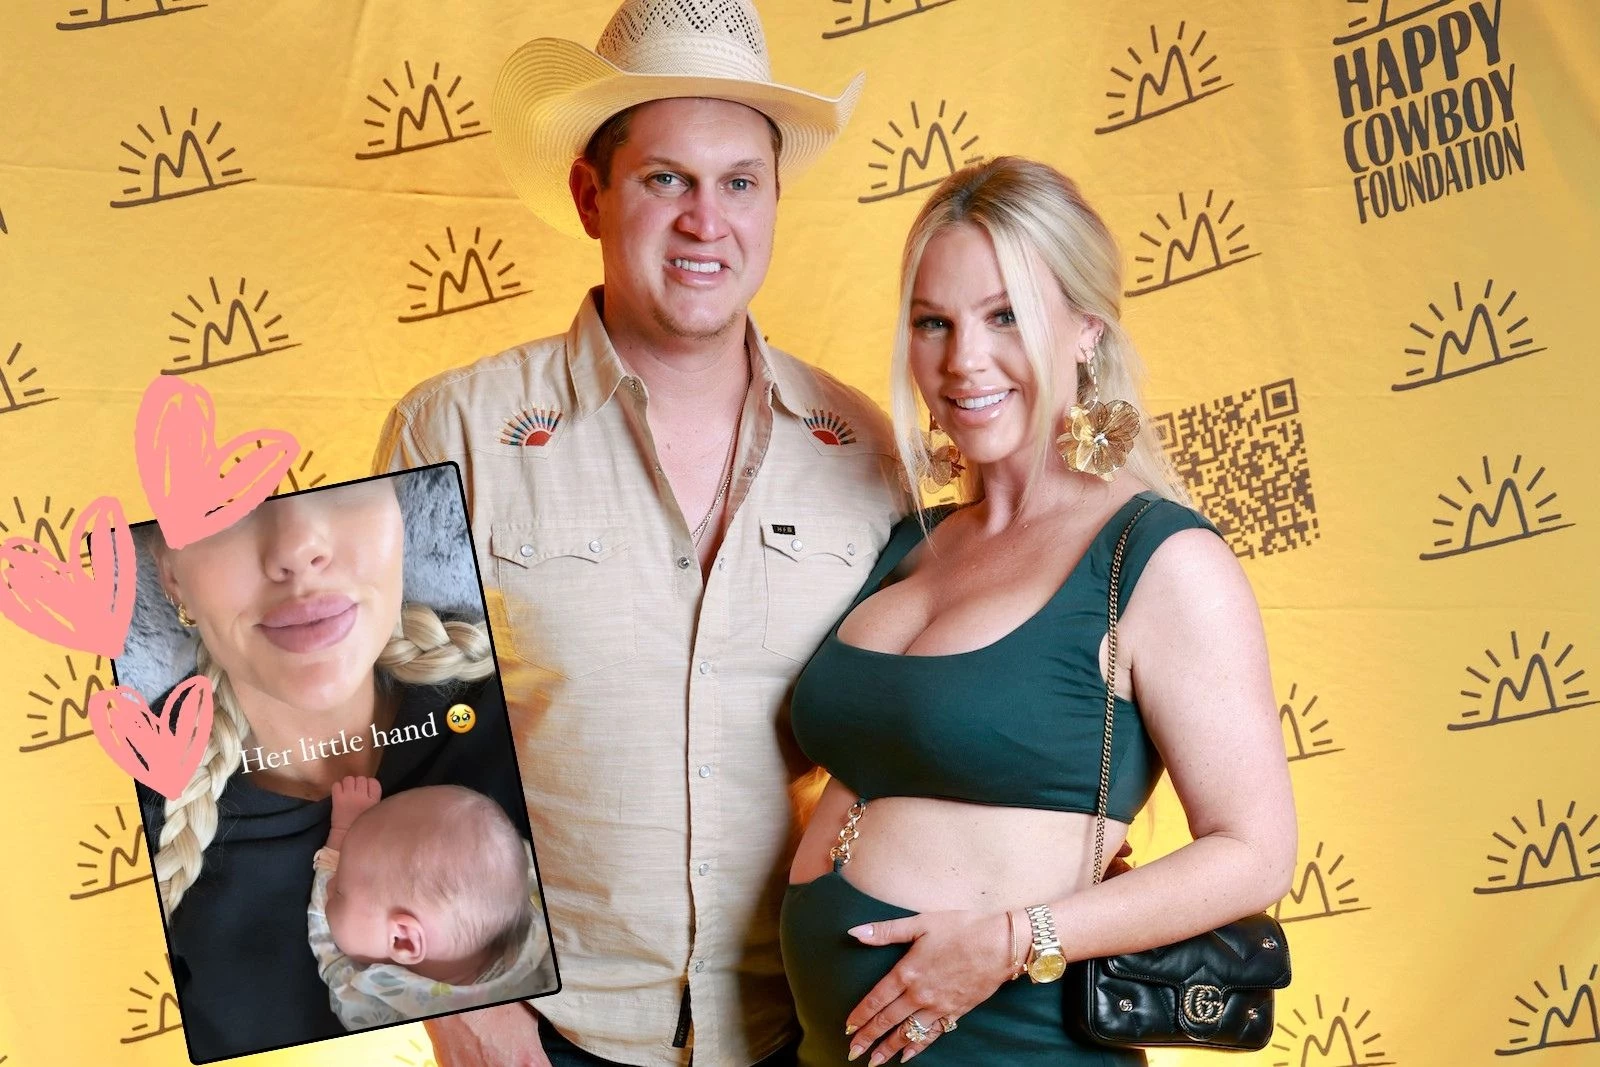 Jon Pardi's Wife Shares Her Birth Story With Baby No. 2